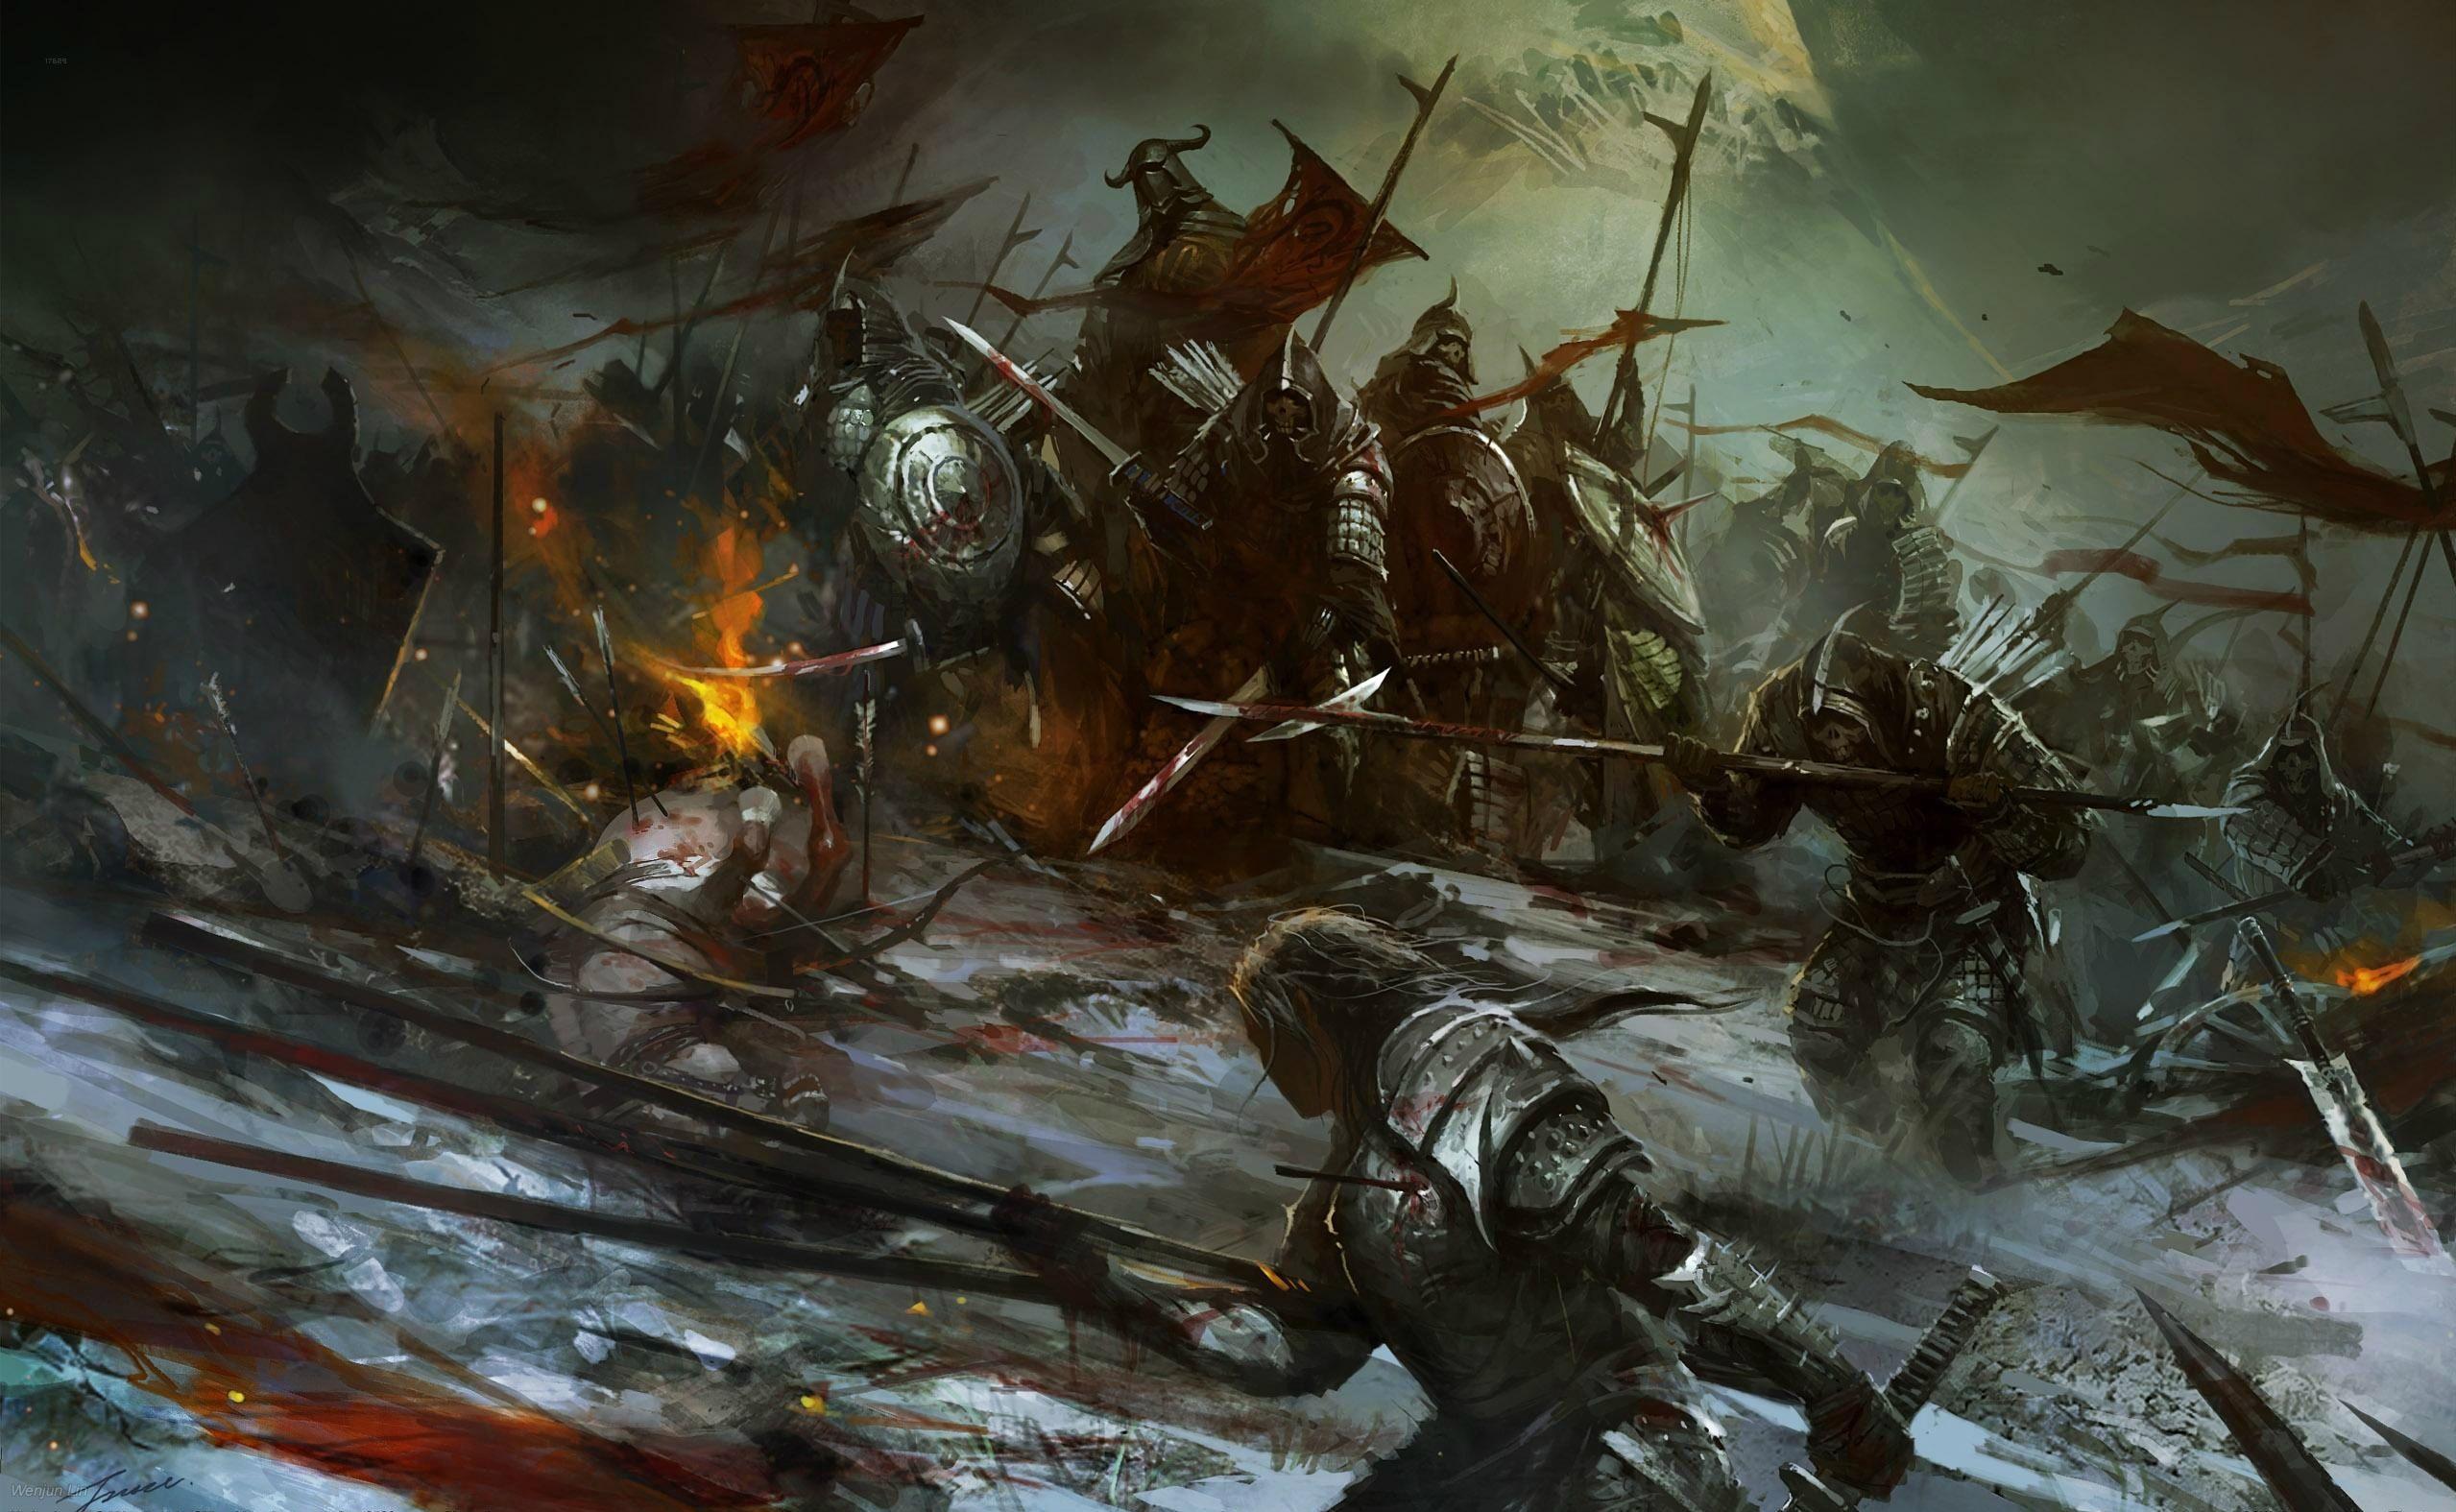  CSFOTO 5x3ft Background for Medieval Battle on